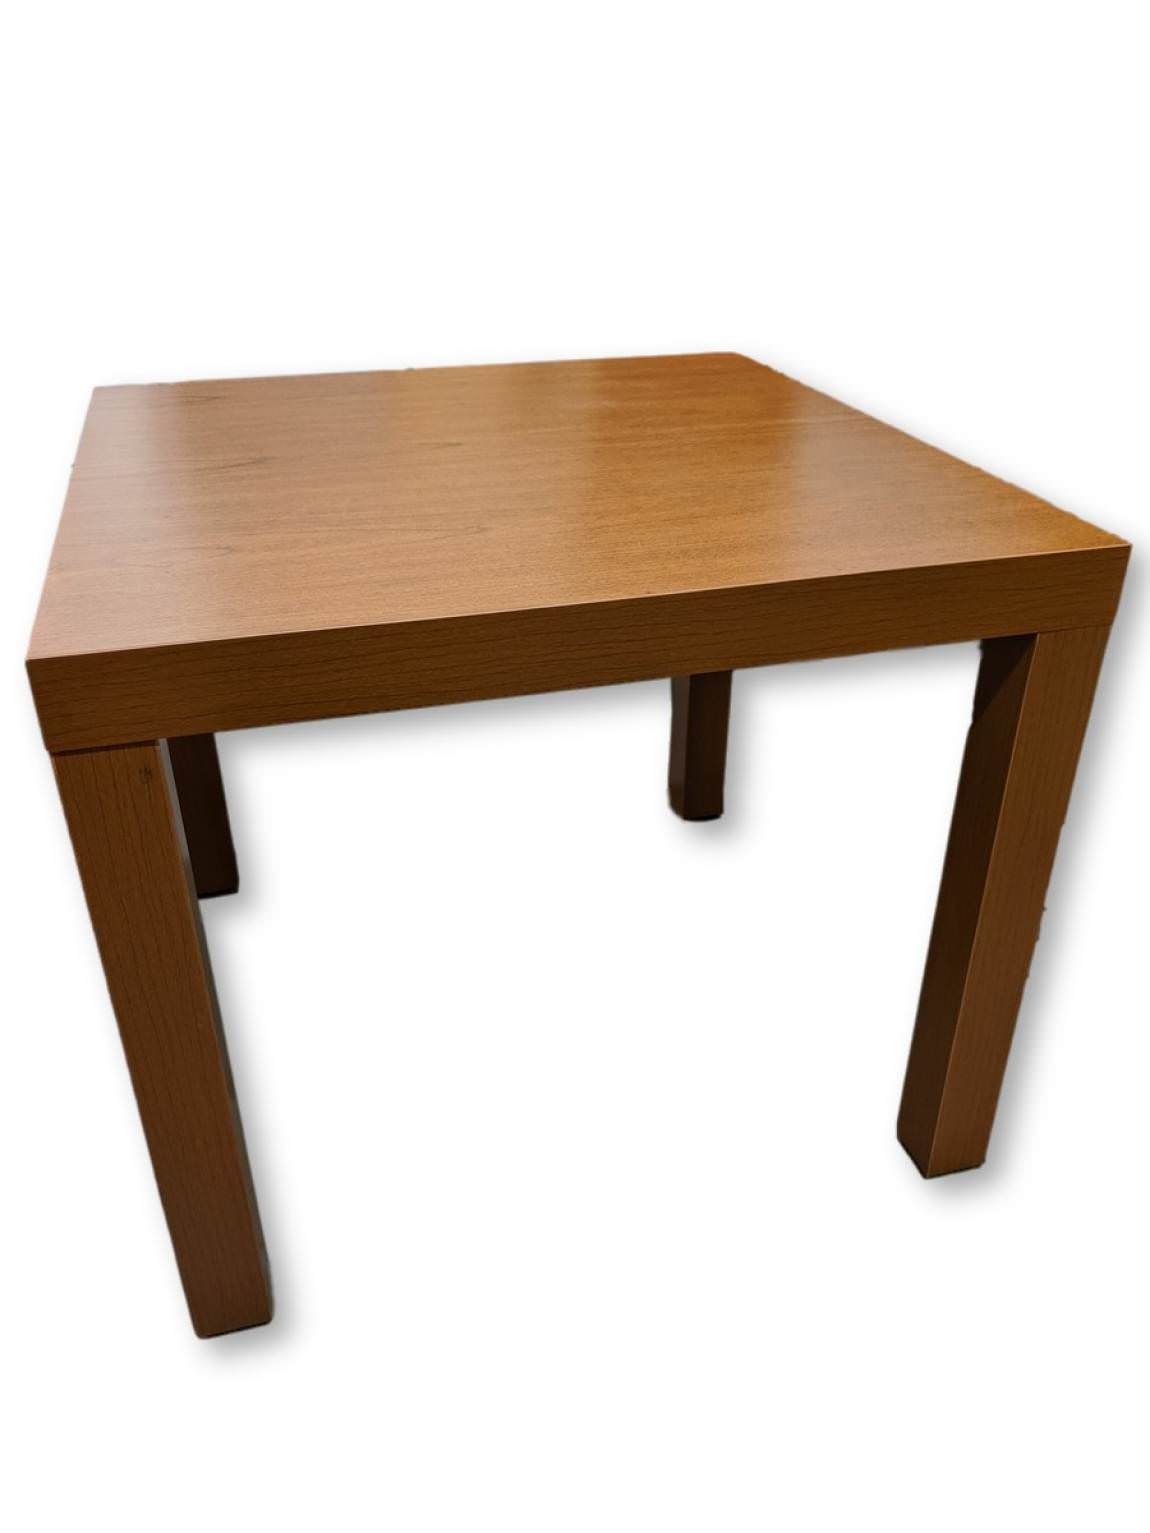 Cherry Laminate End Table – 24x24